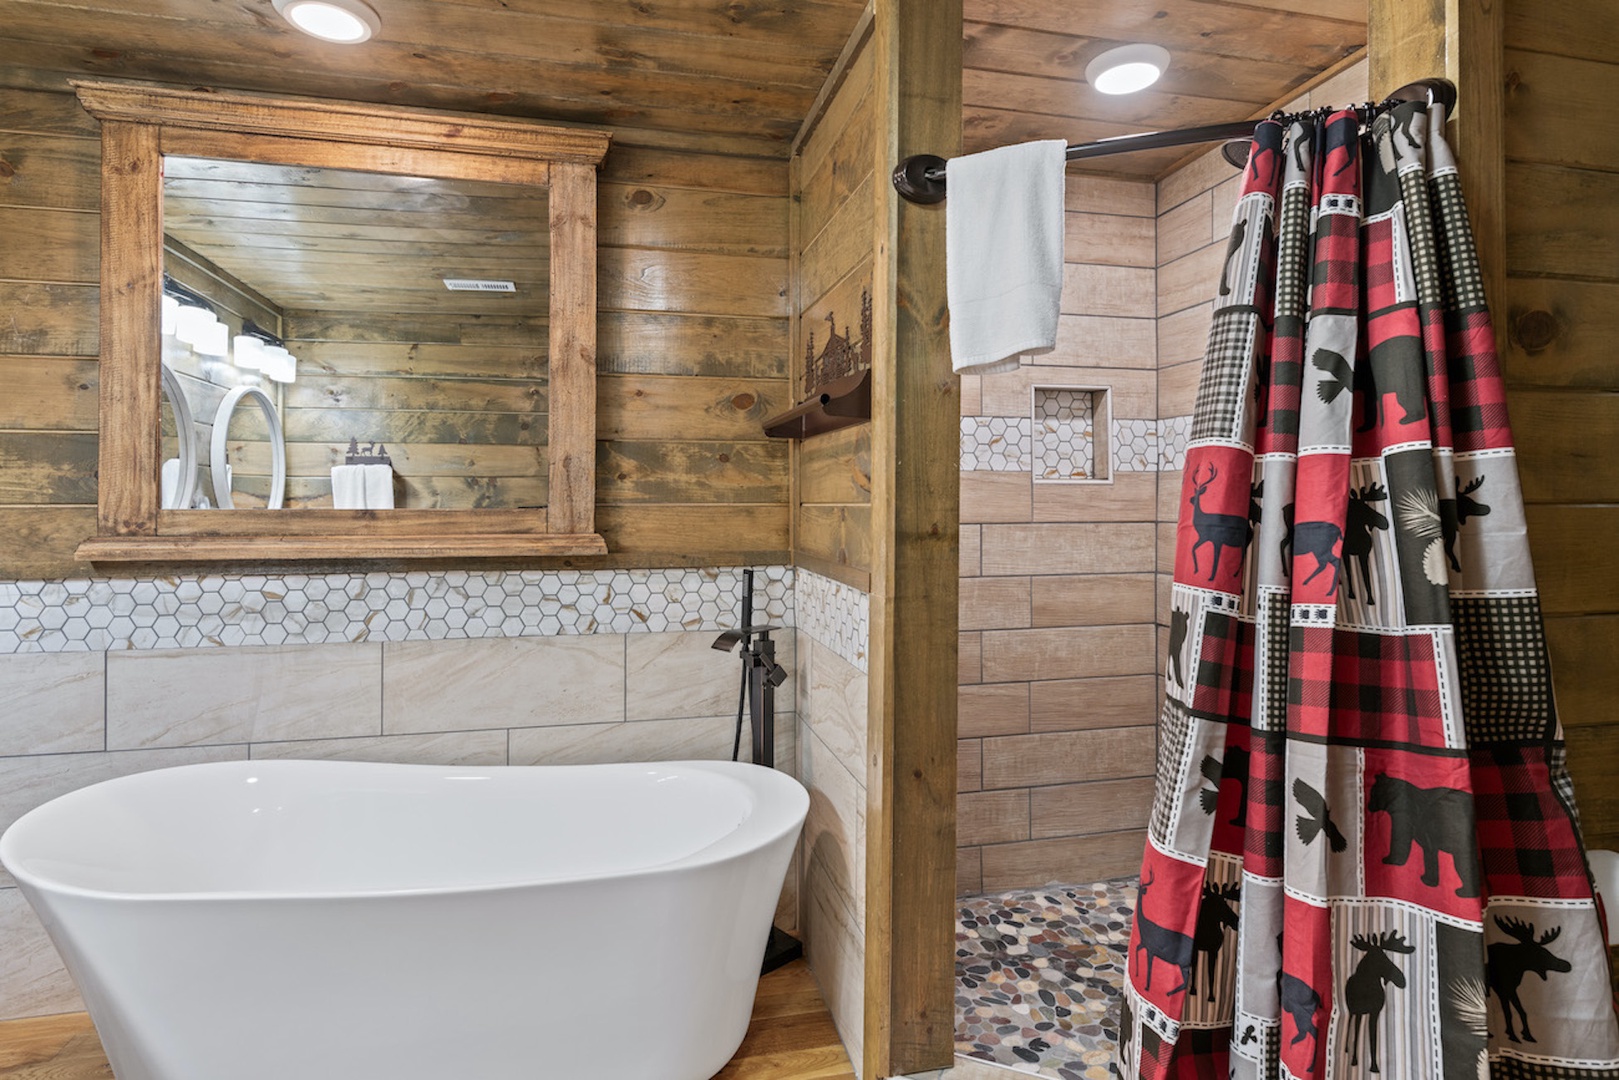 This spacious ensuite includes a double vanity, shower, & soaking tub